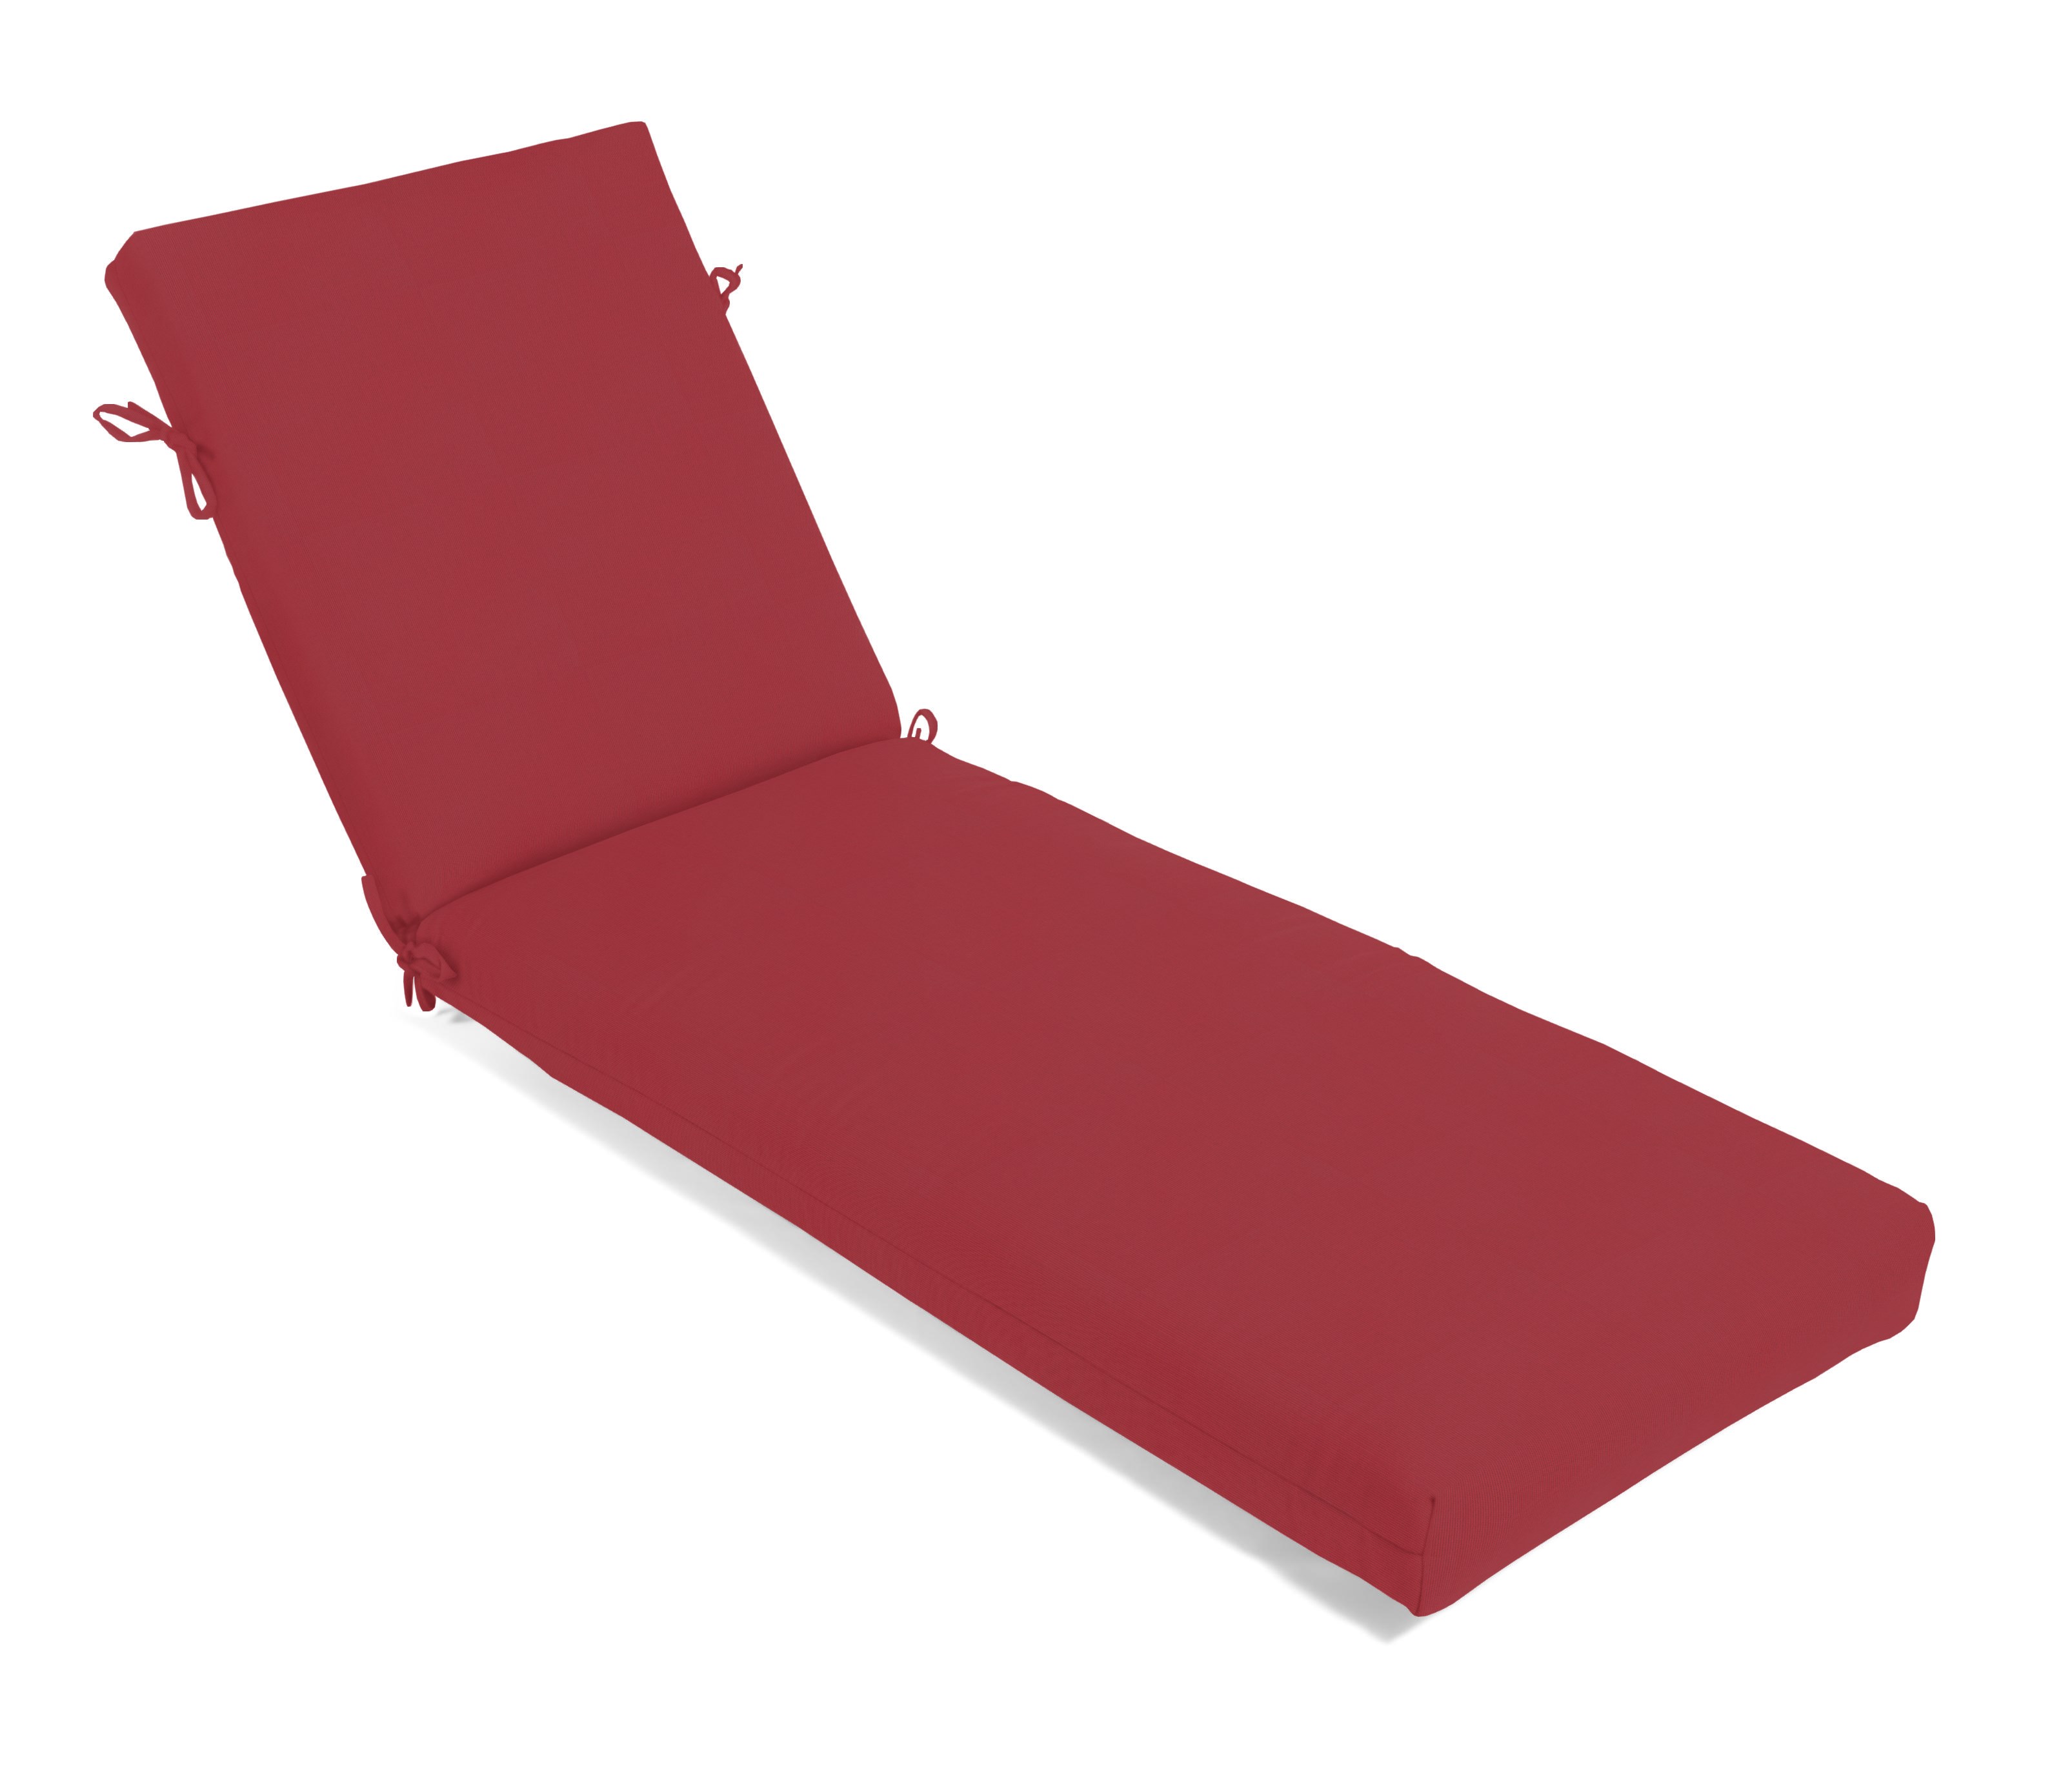 spectrum cherry thick chaise cushion product image